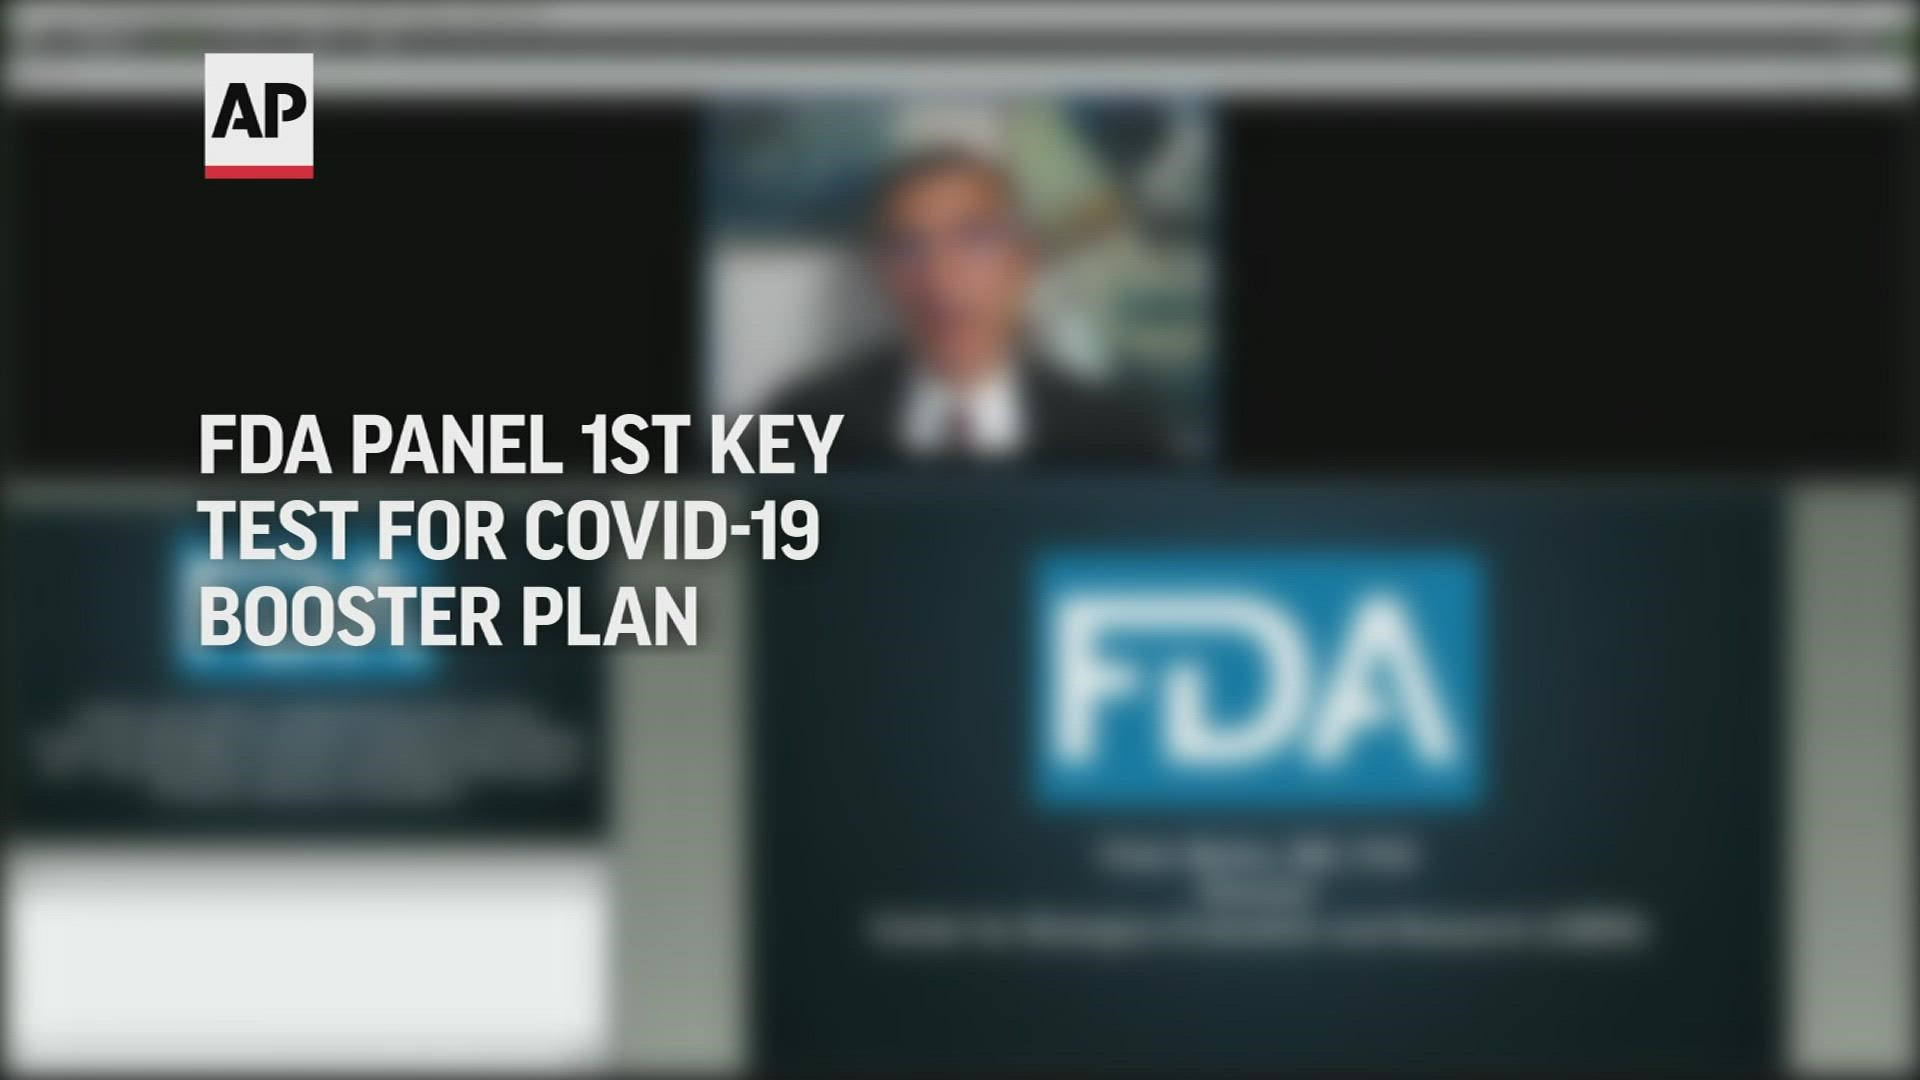 Government advisers are debating Friday whether to recommend extra doses of the Pfizer COVID-19 vaccine.